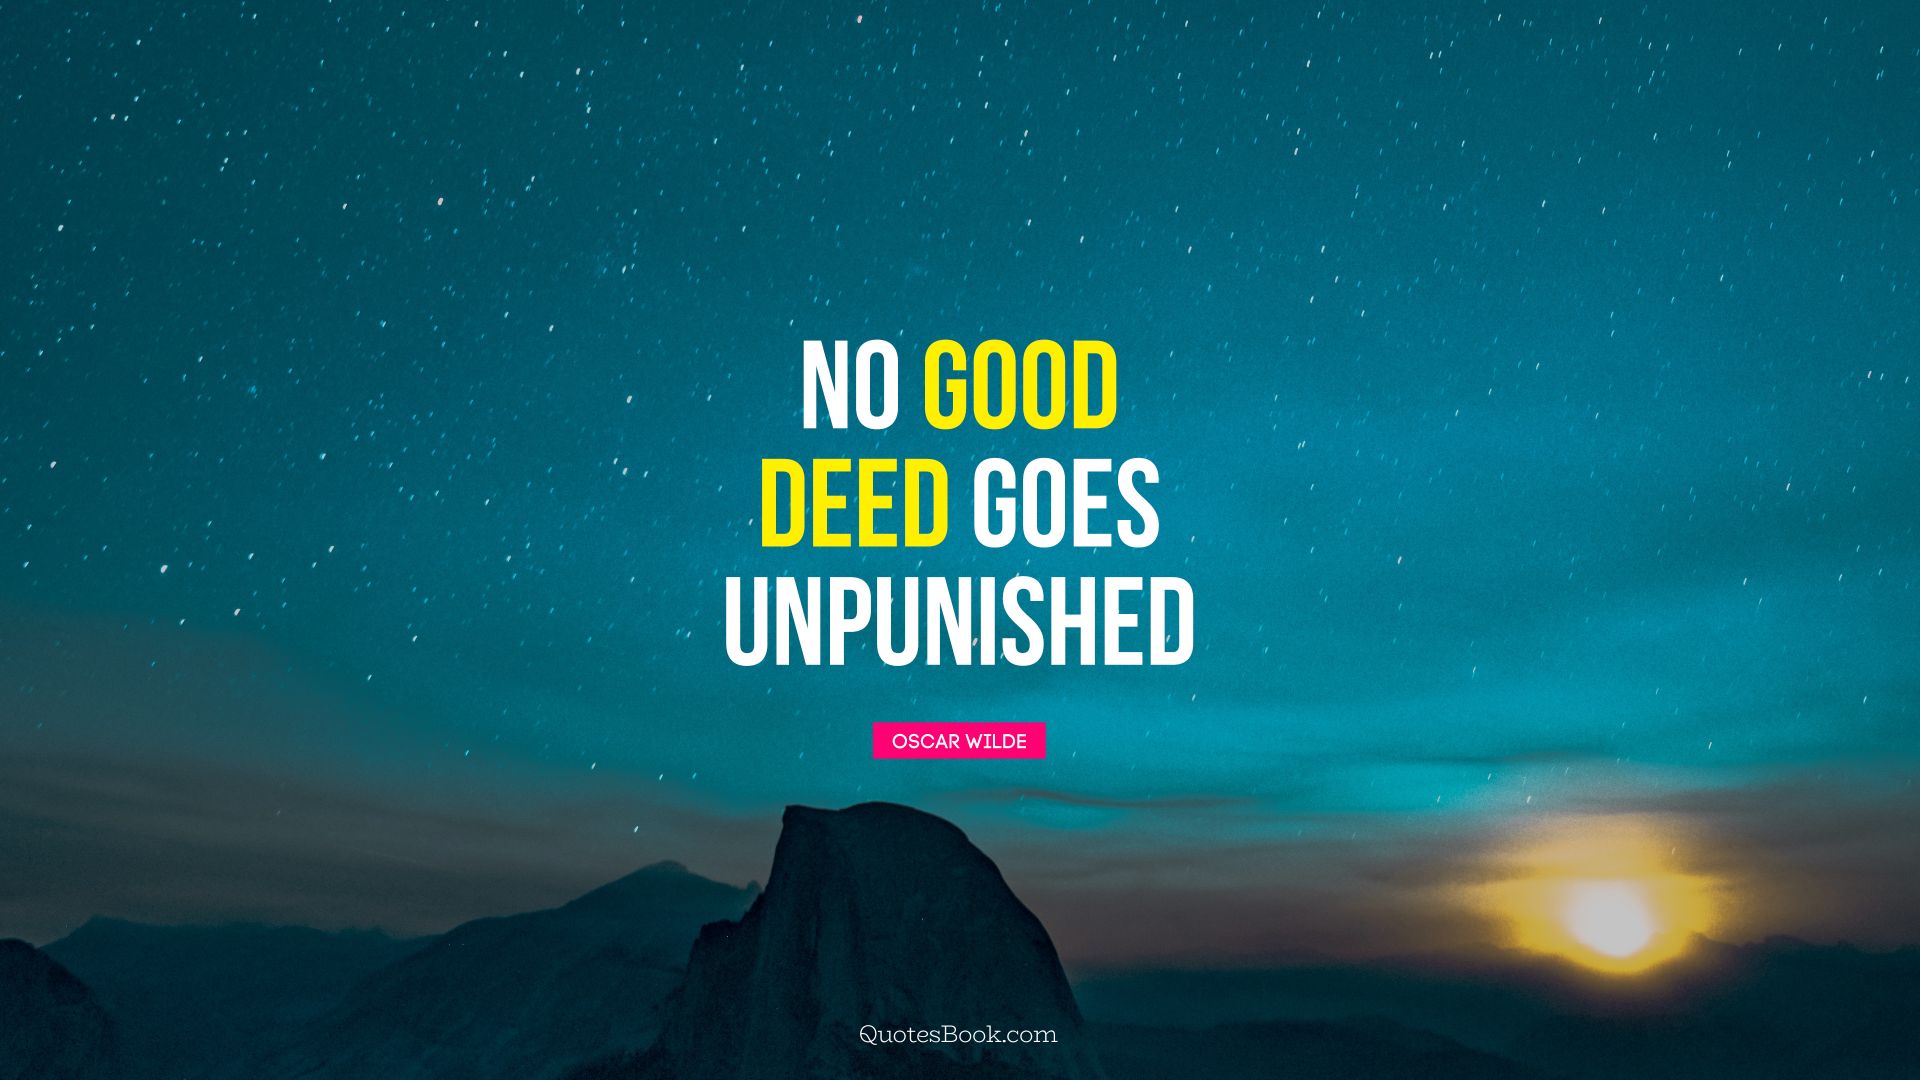 No good deed goes unpunished. - Quote by Oscar Wilde